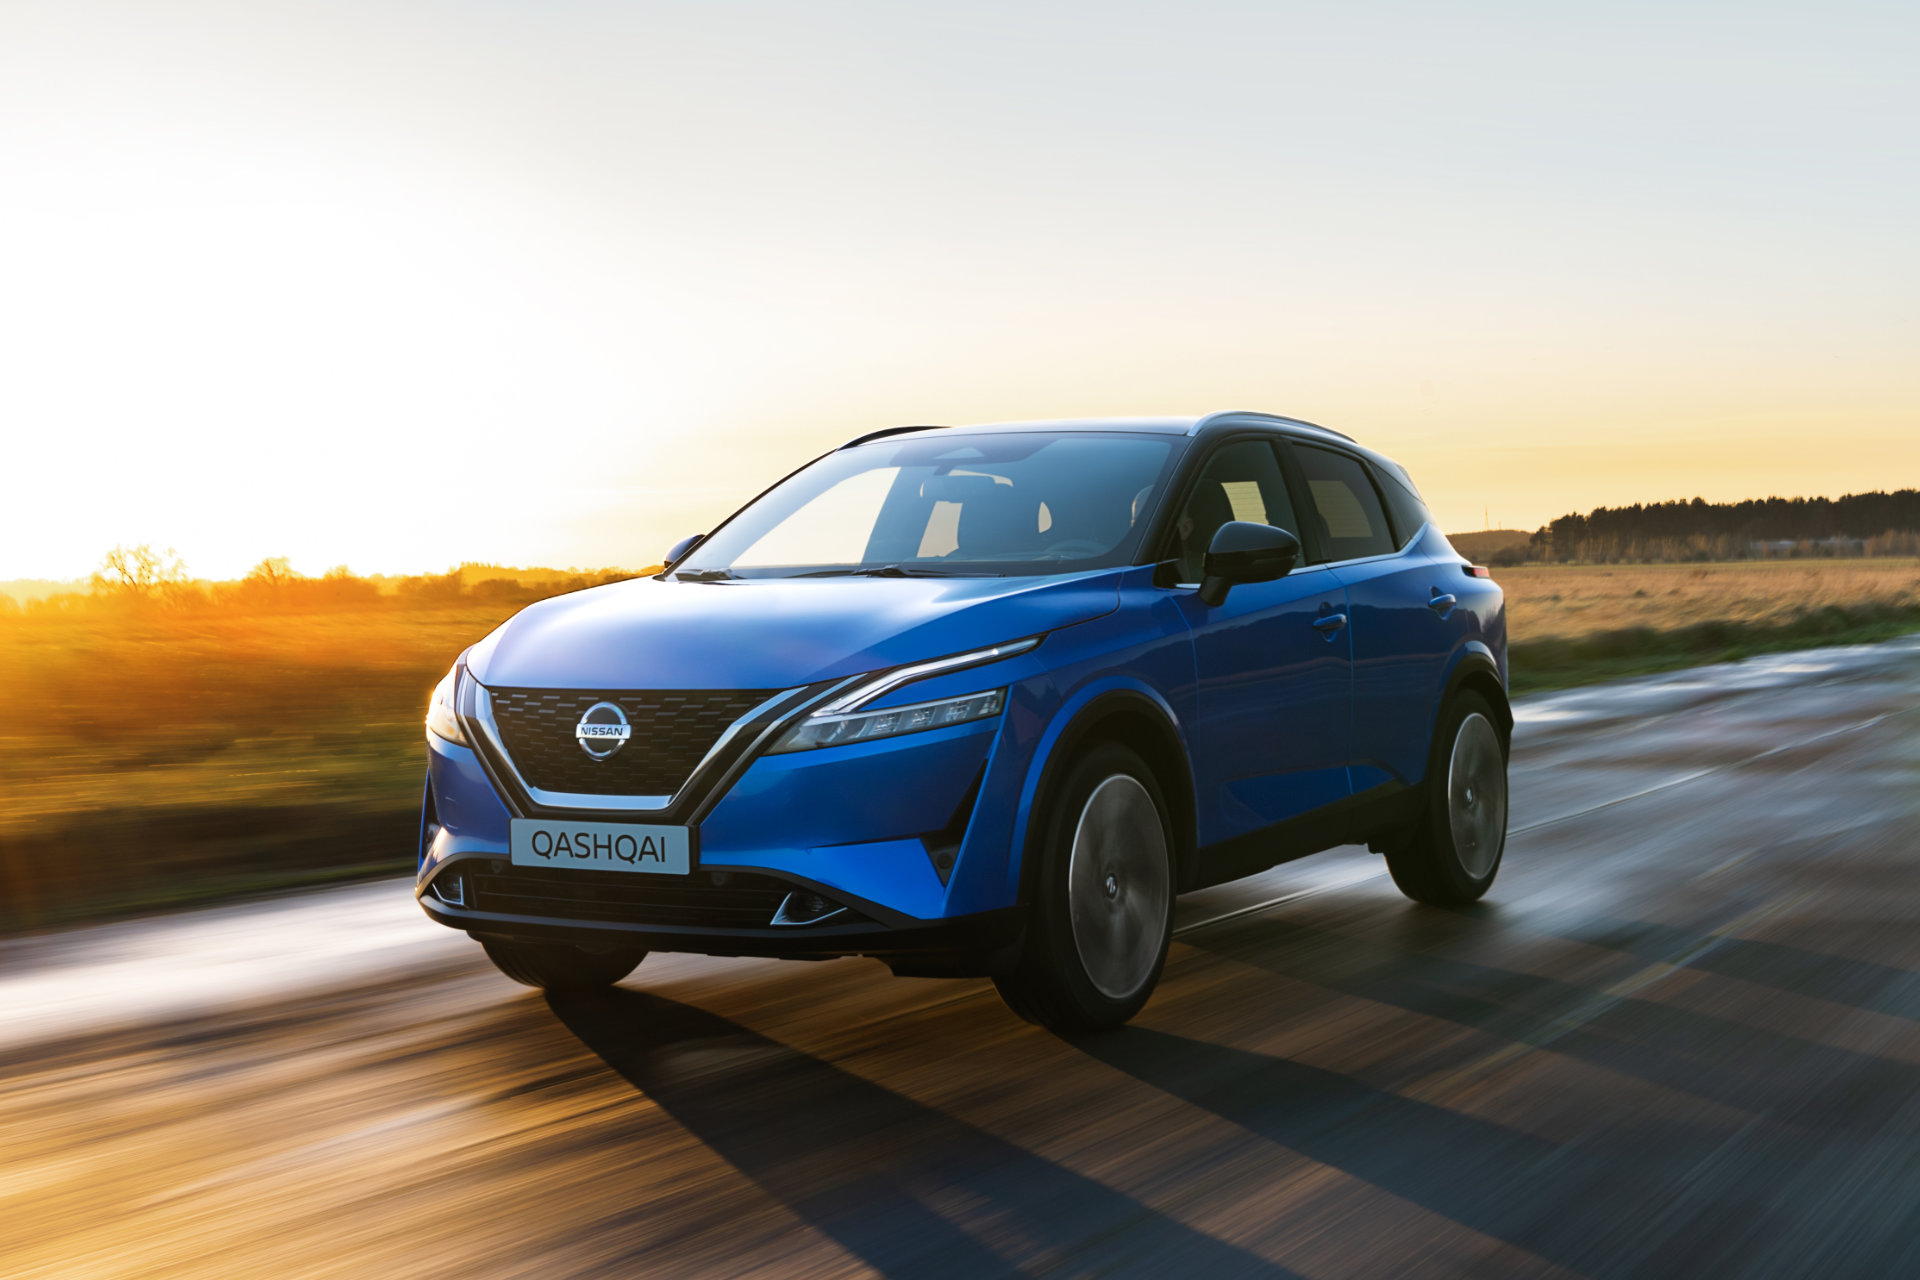 New Nissan Qashqai In Europe Made With Recycled Aluminium